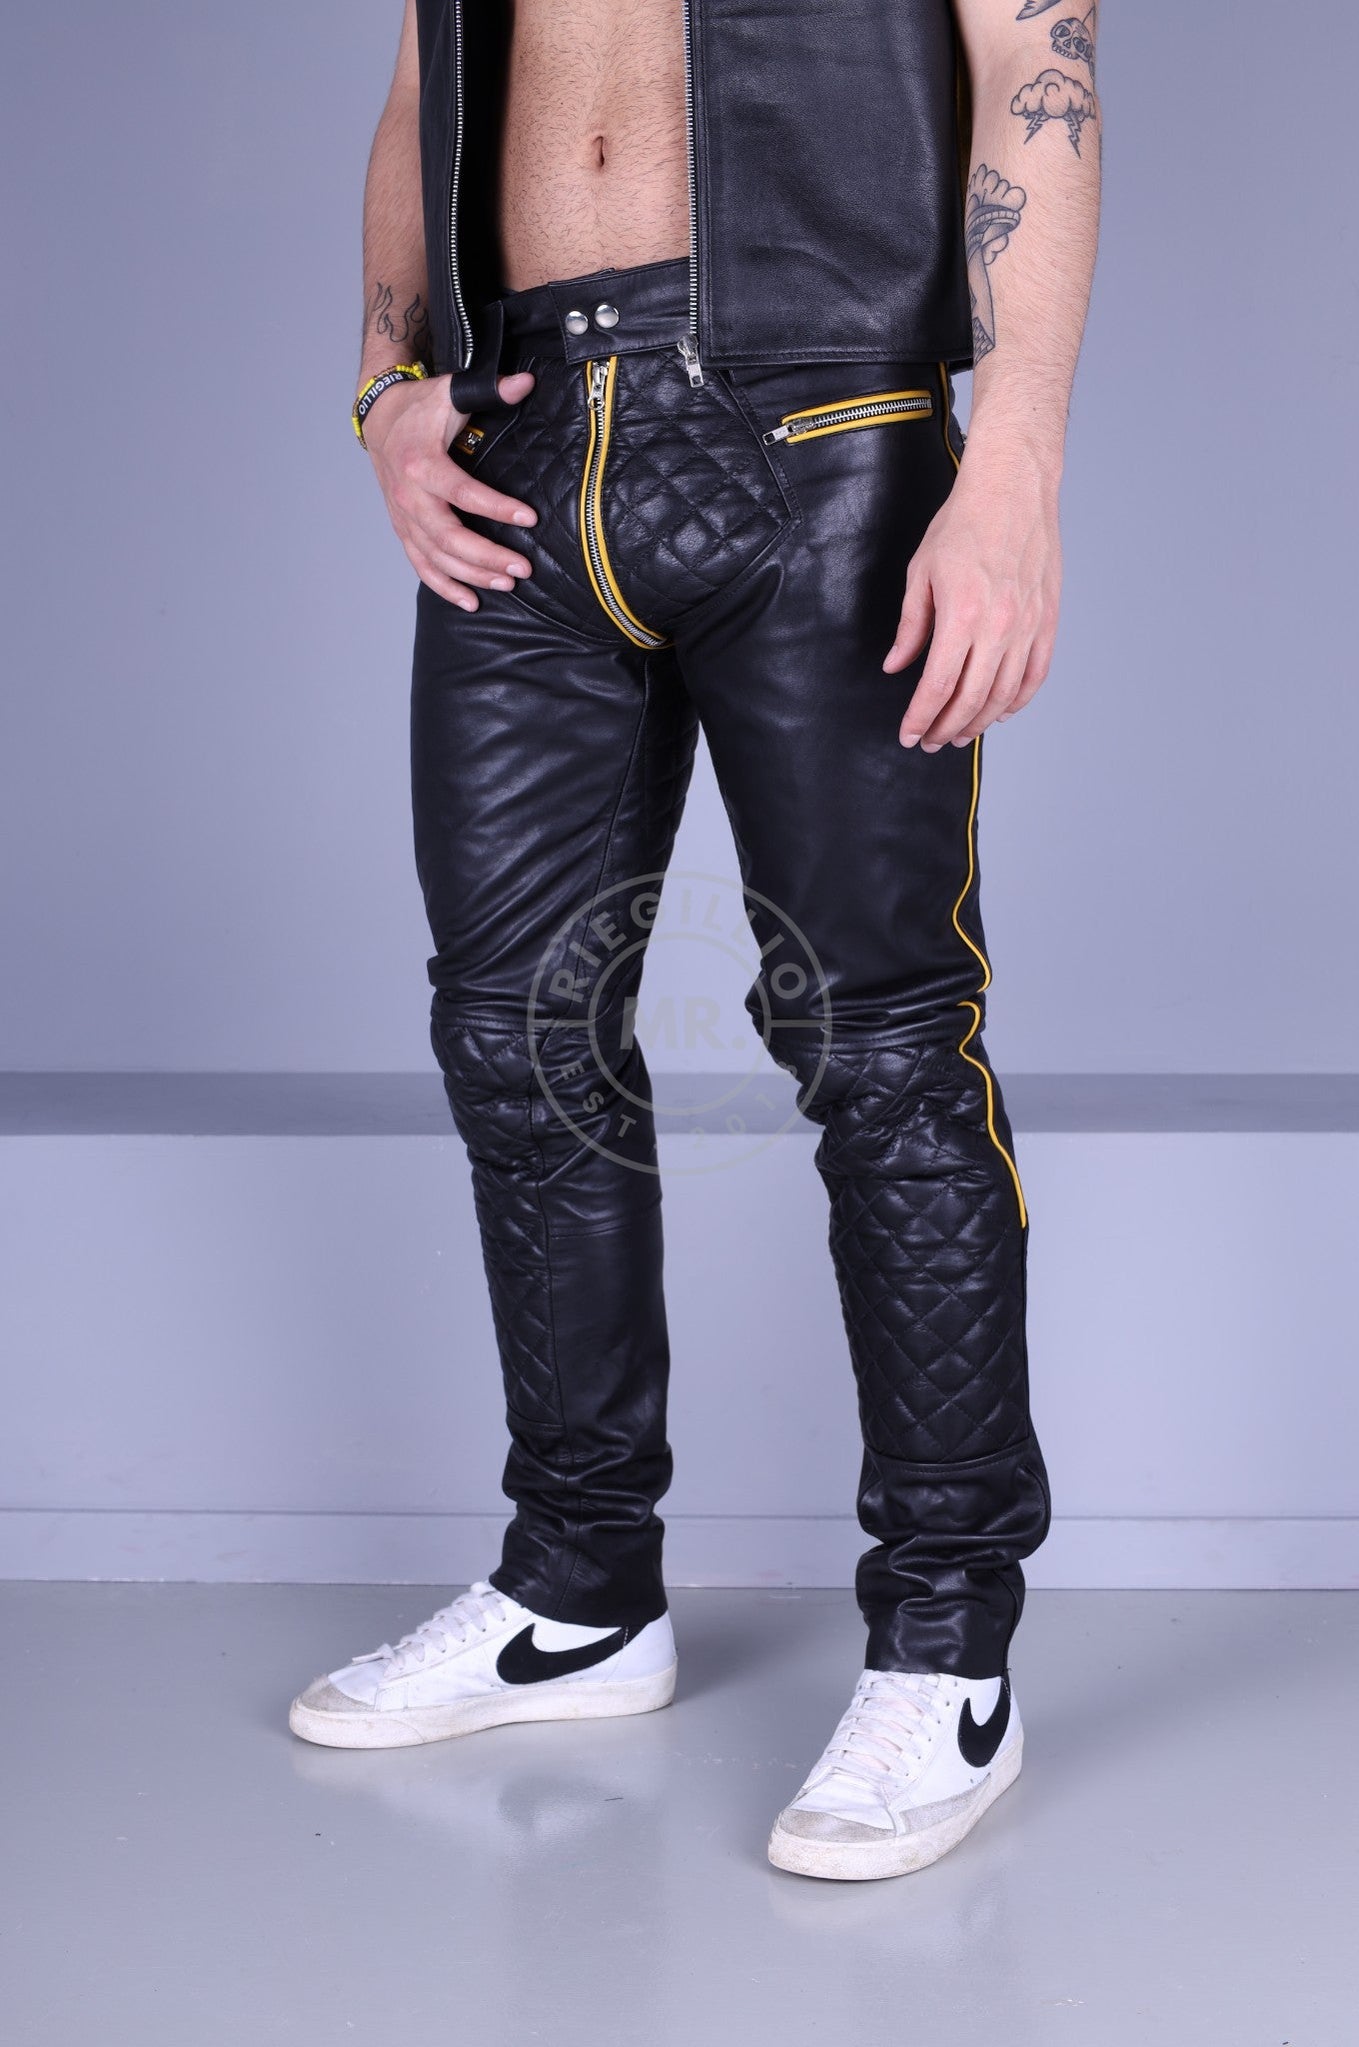 Padded Leather Pants - Yellow Piping by MR. Riegillio